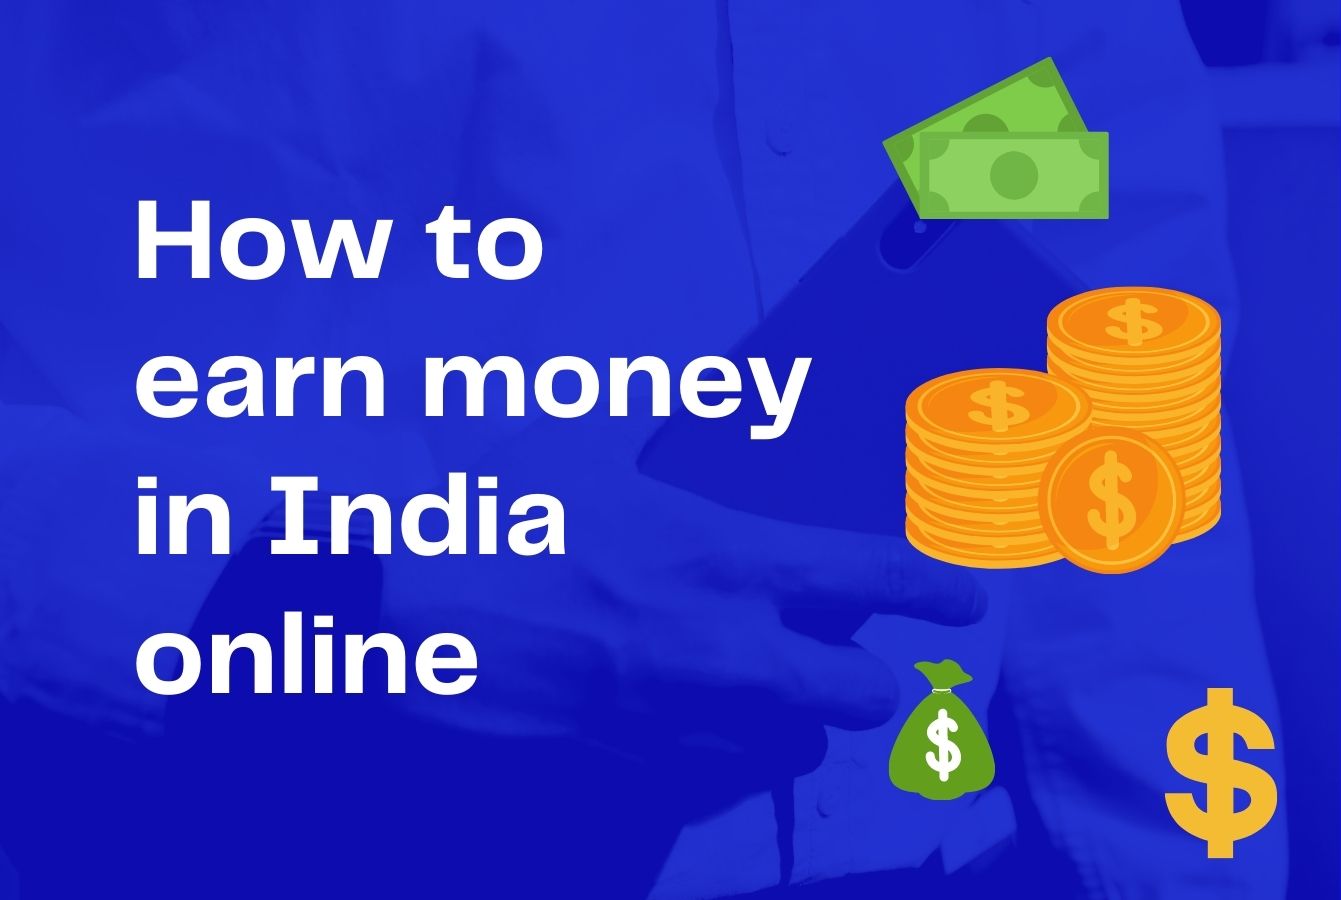 online assignments to earn money in india